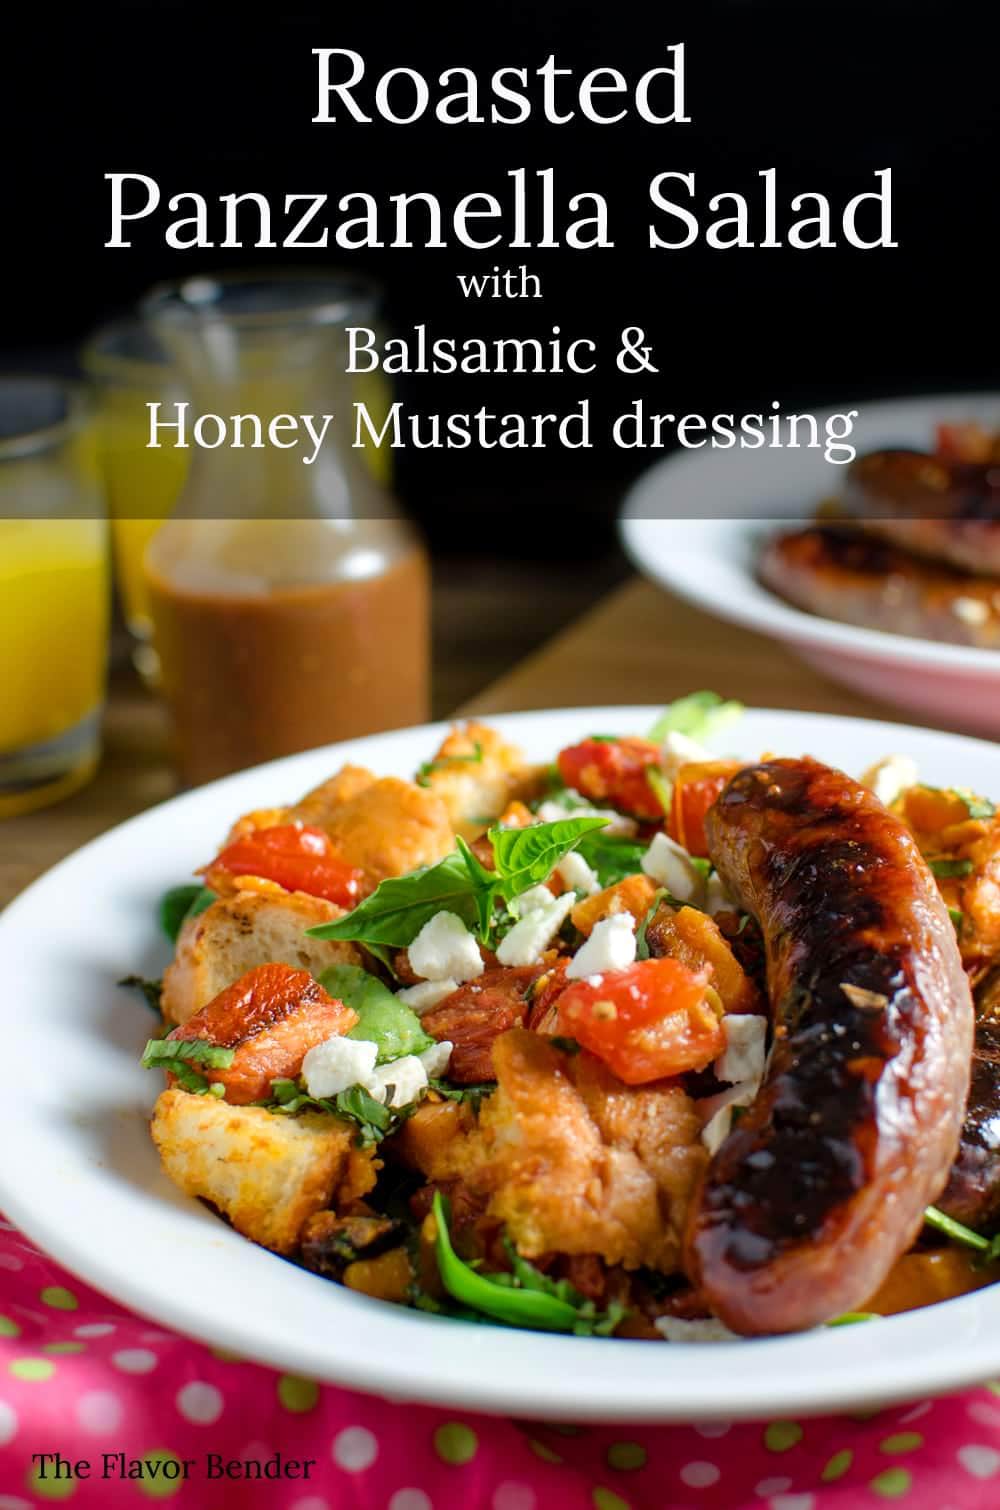 Roasted Panzanella Salad with a Balsamic Honey Mustard Dressing- with roasted Sausages, Tomatoes, Sweet potatoes, Goat cheese and Herbs is easy to make, and can be eaten warm, or at room temperature! Perfect for winter or any time of the year.